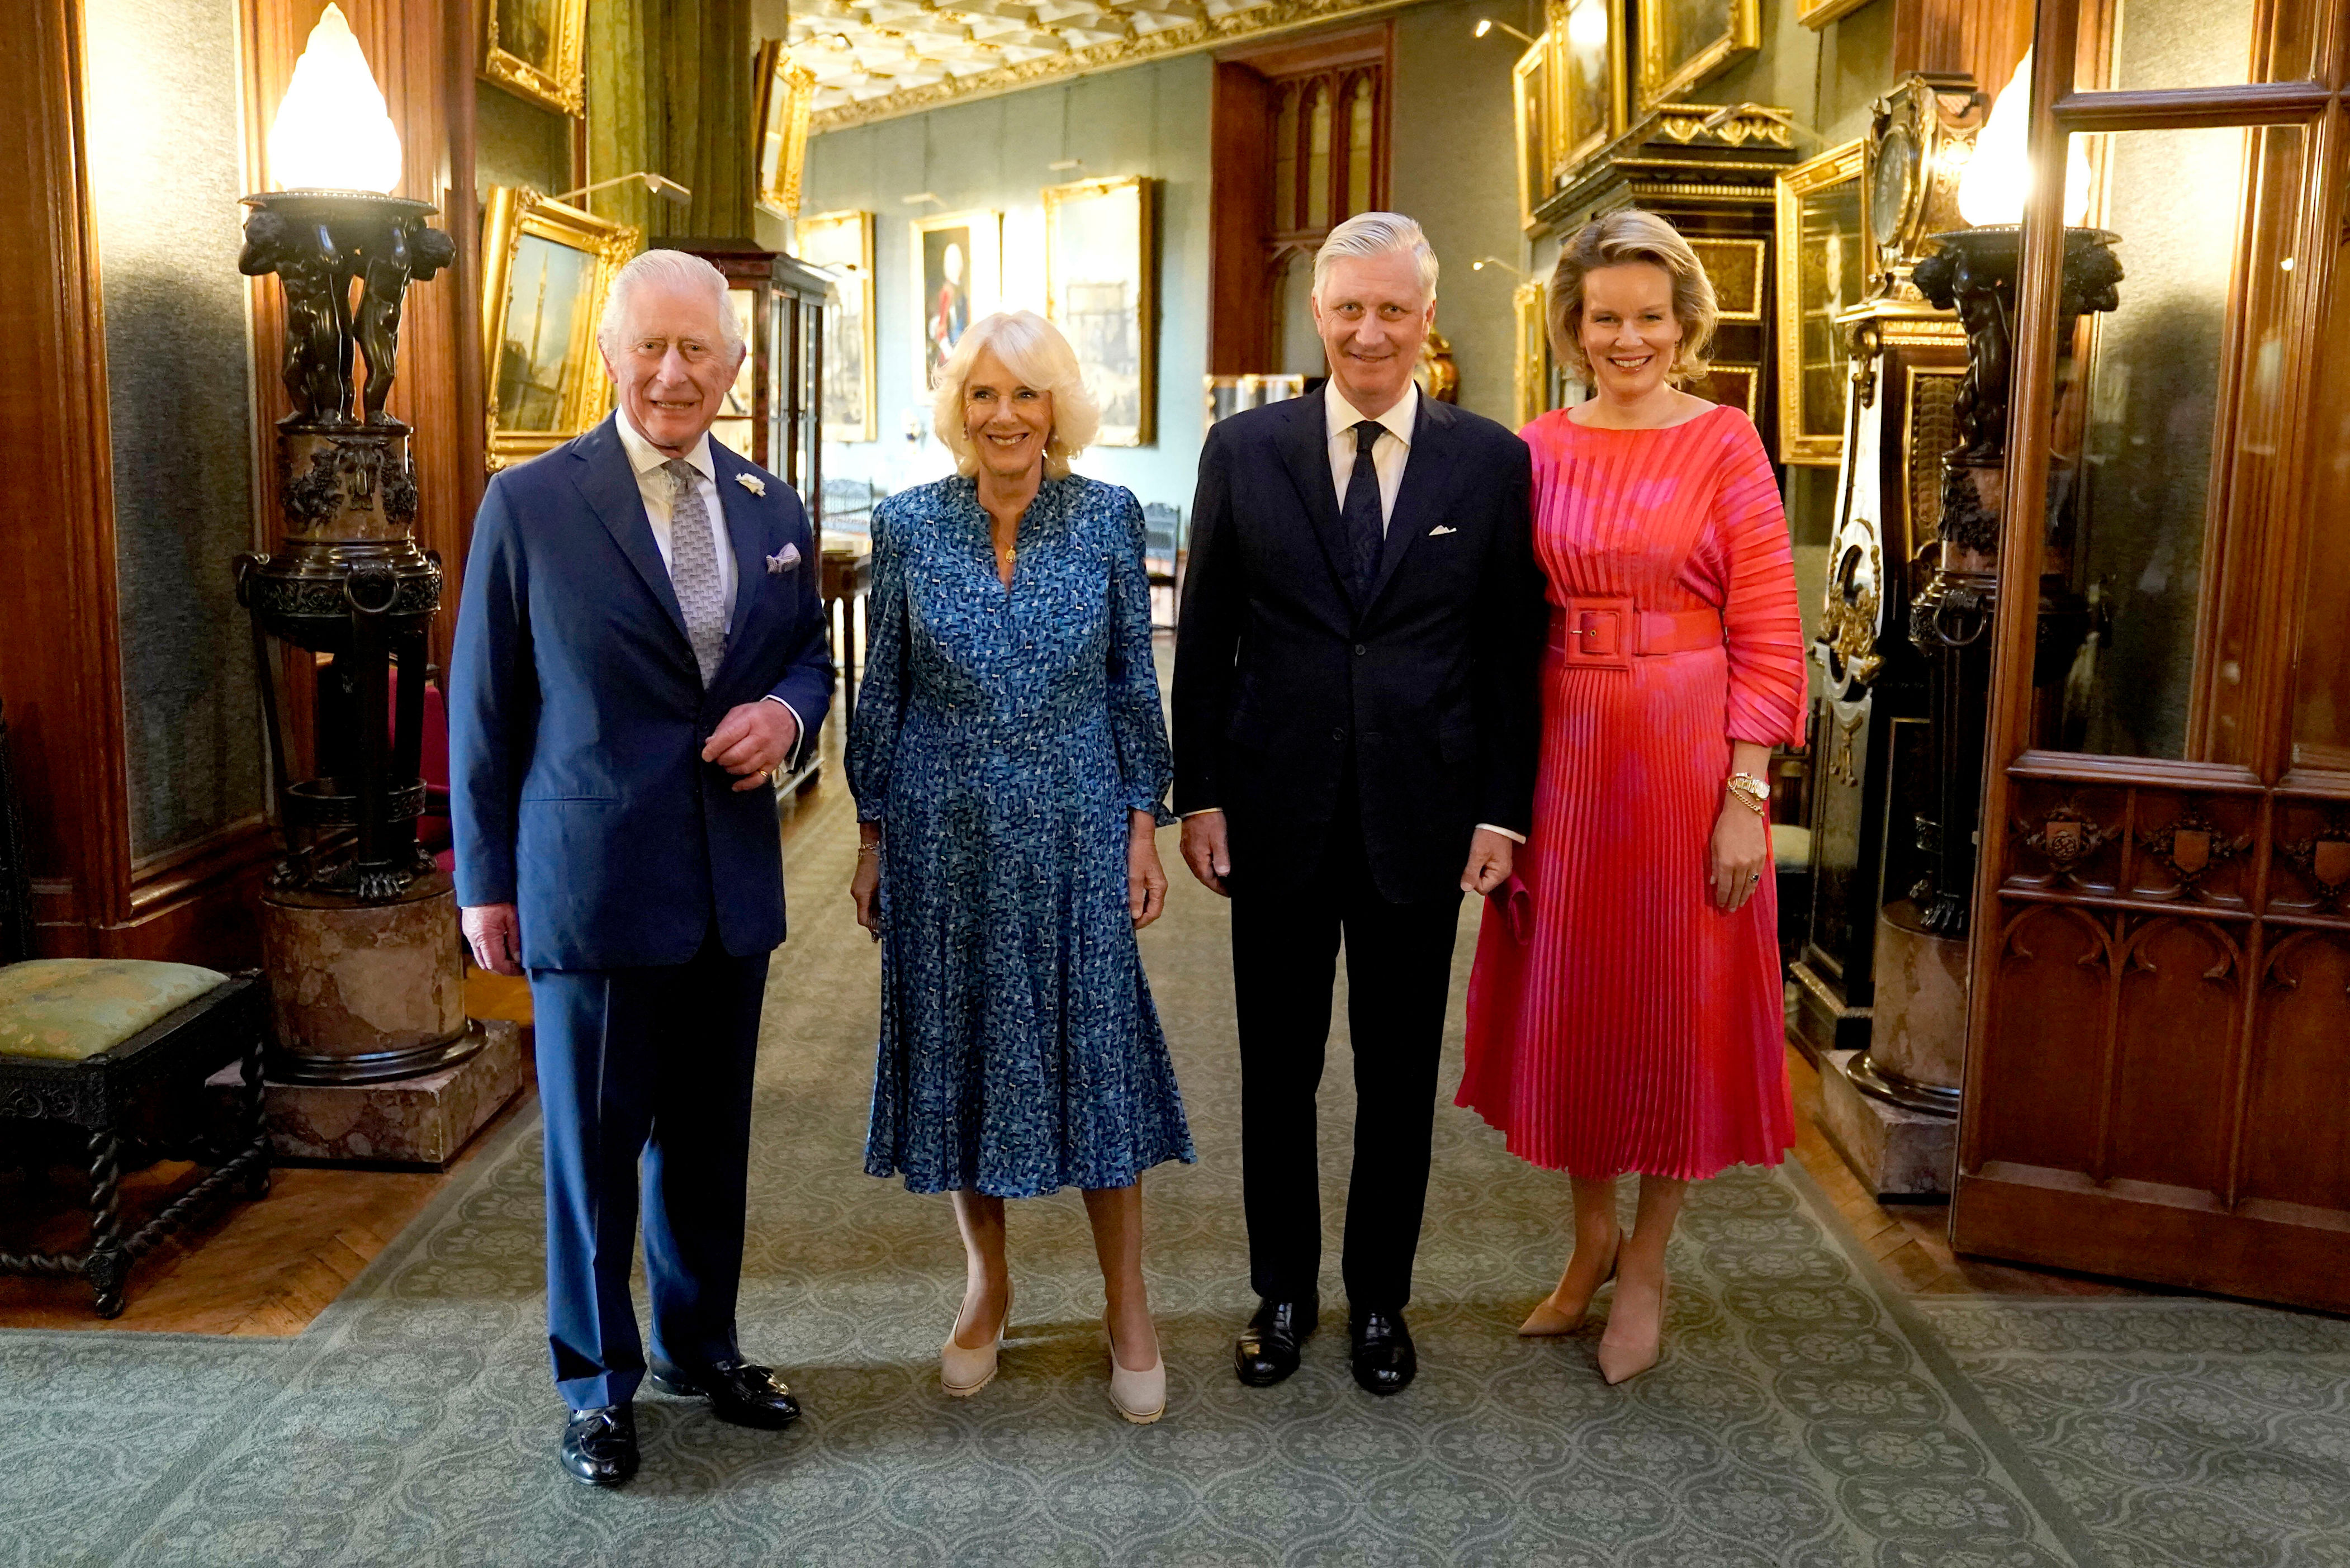 <p>Britain's King Charles III and Queen Camilla welcome Belgium's King Philippe and Queen Mathilde during a reception held in their honor at Windsor Castle in Windsor, England, on June 8, 2023.</p>